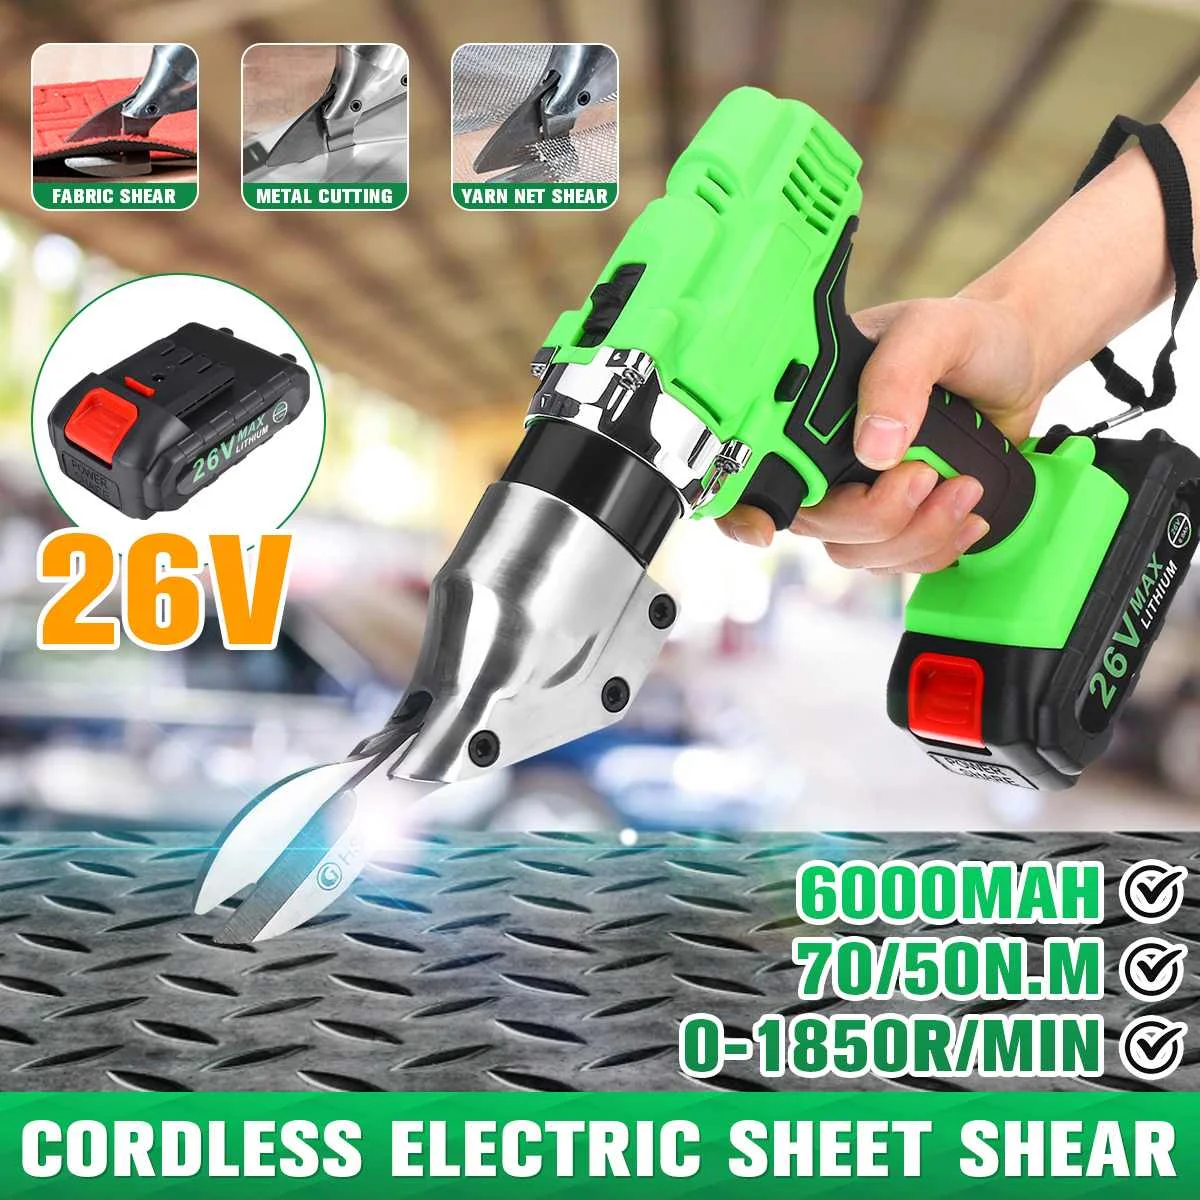 

26V 990W Portable Cordless Rechargeable Electric Scissor Metal Sheet Shear Cutter Scissors Power Tool 26V With 6000mAh Battery